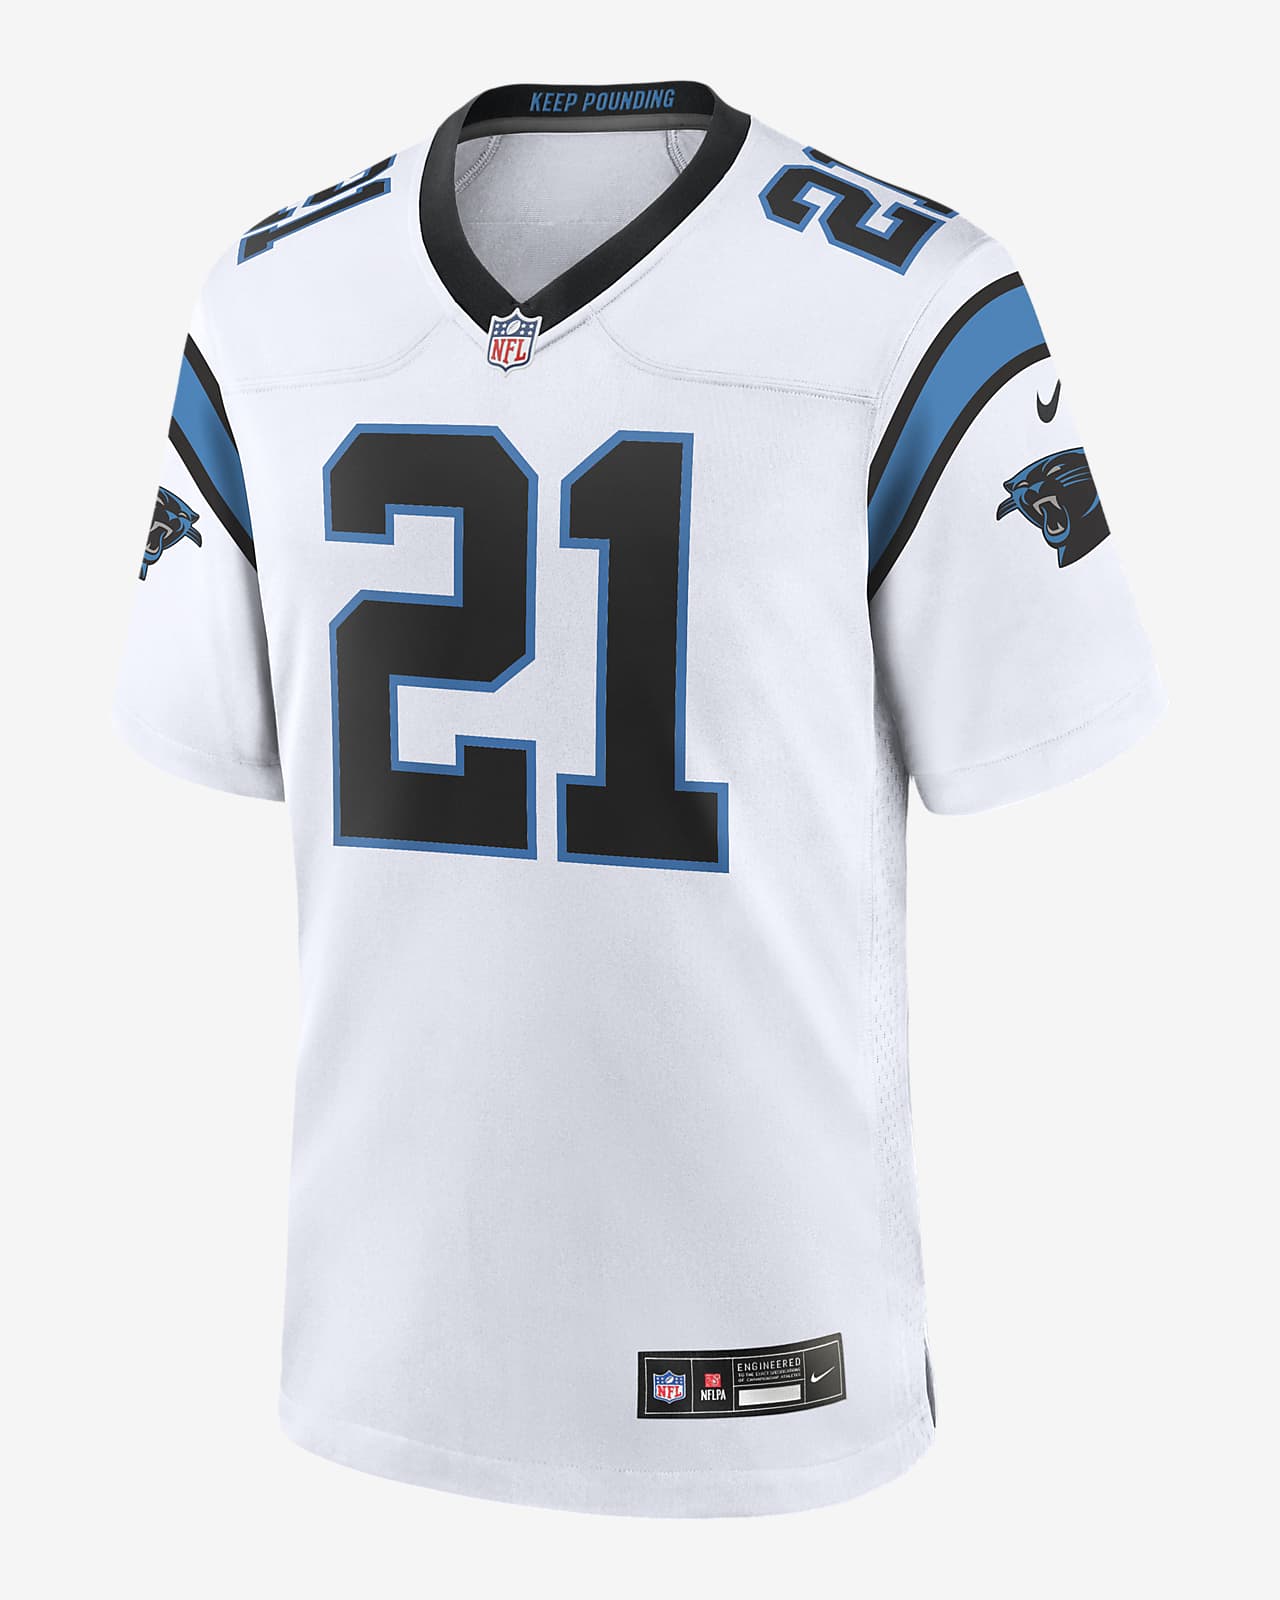 Jeremy Chinn Carolina Panthers Nike Men's NFL Game Football Jersey in White, Size: Small | 67NM02PI9DF-SZ0